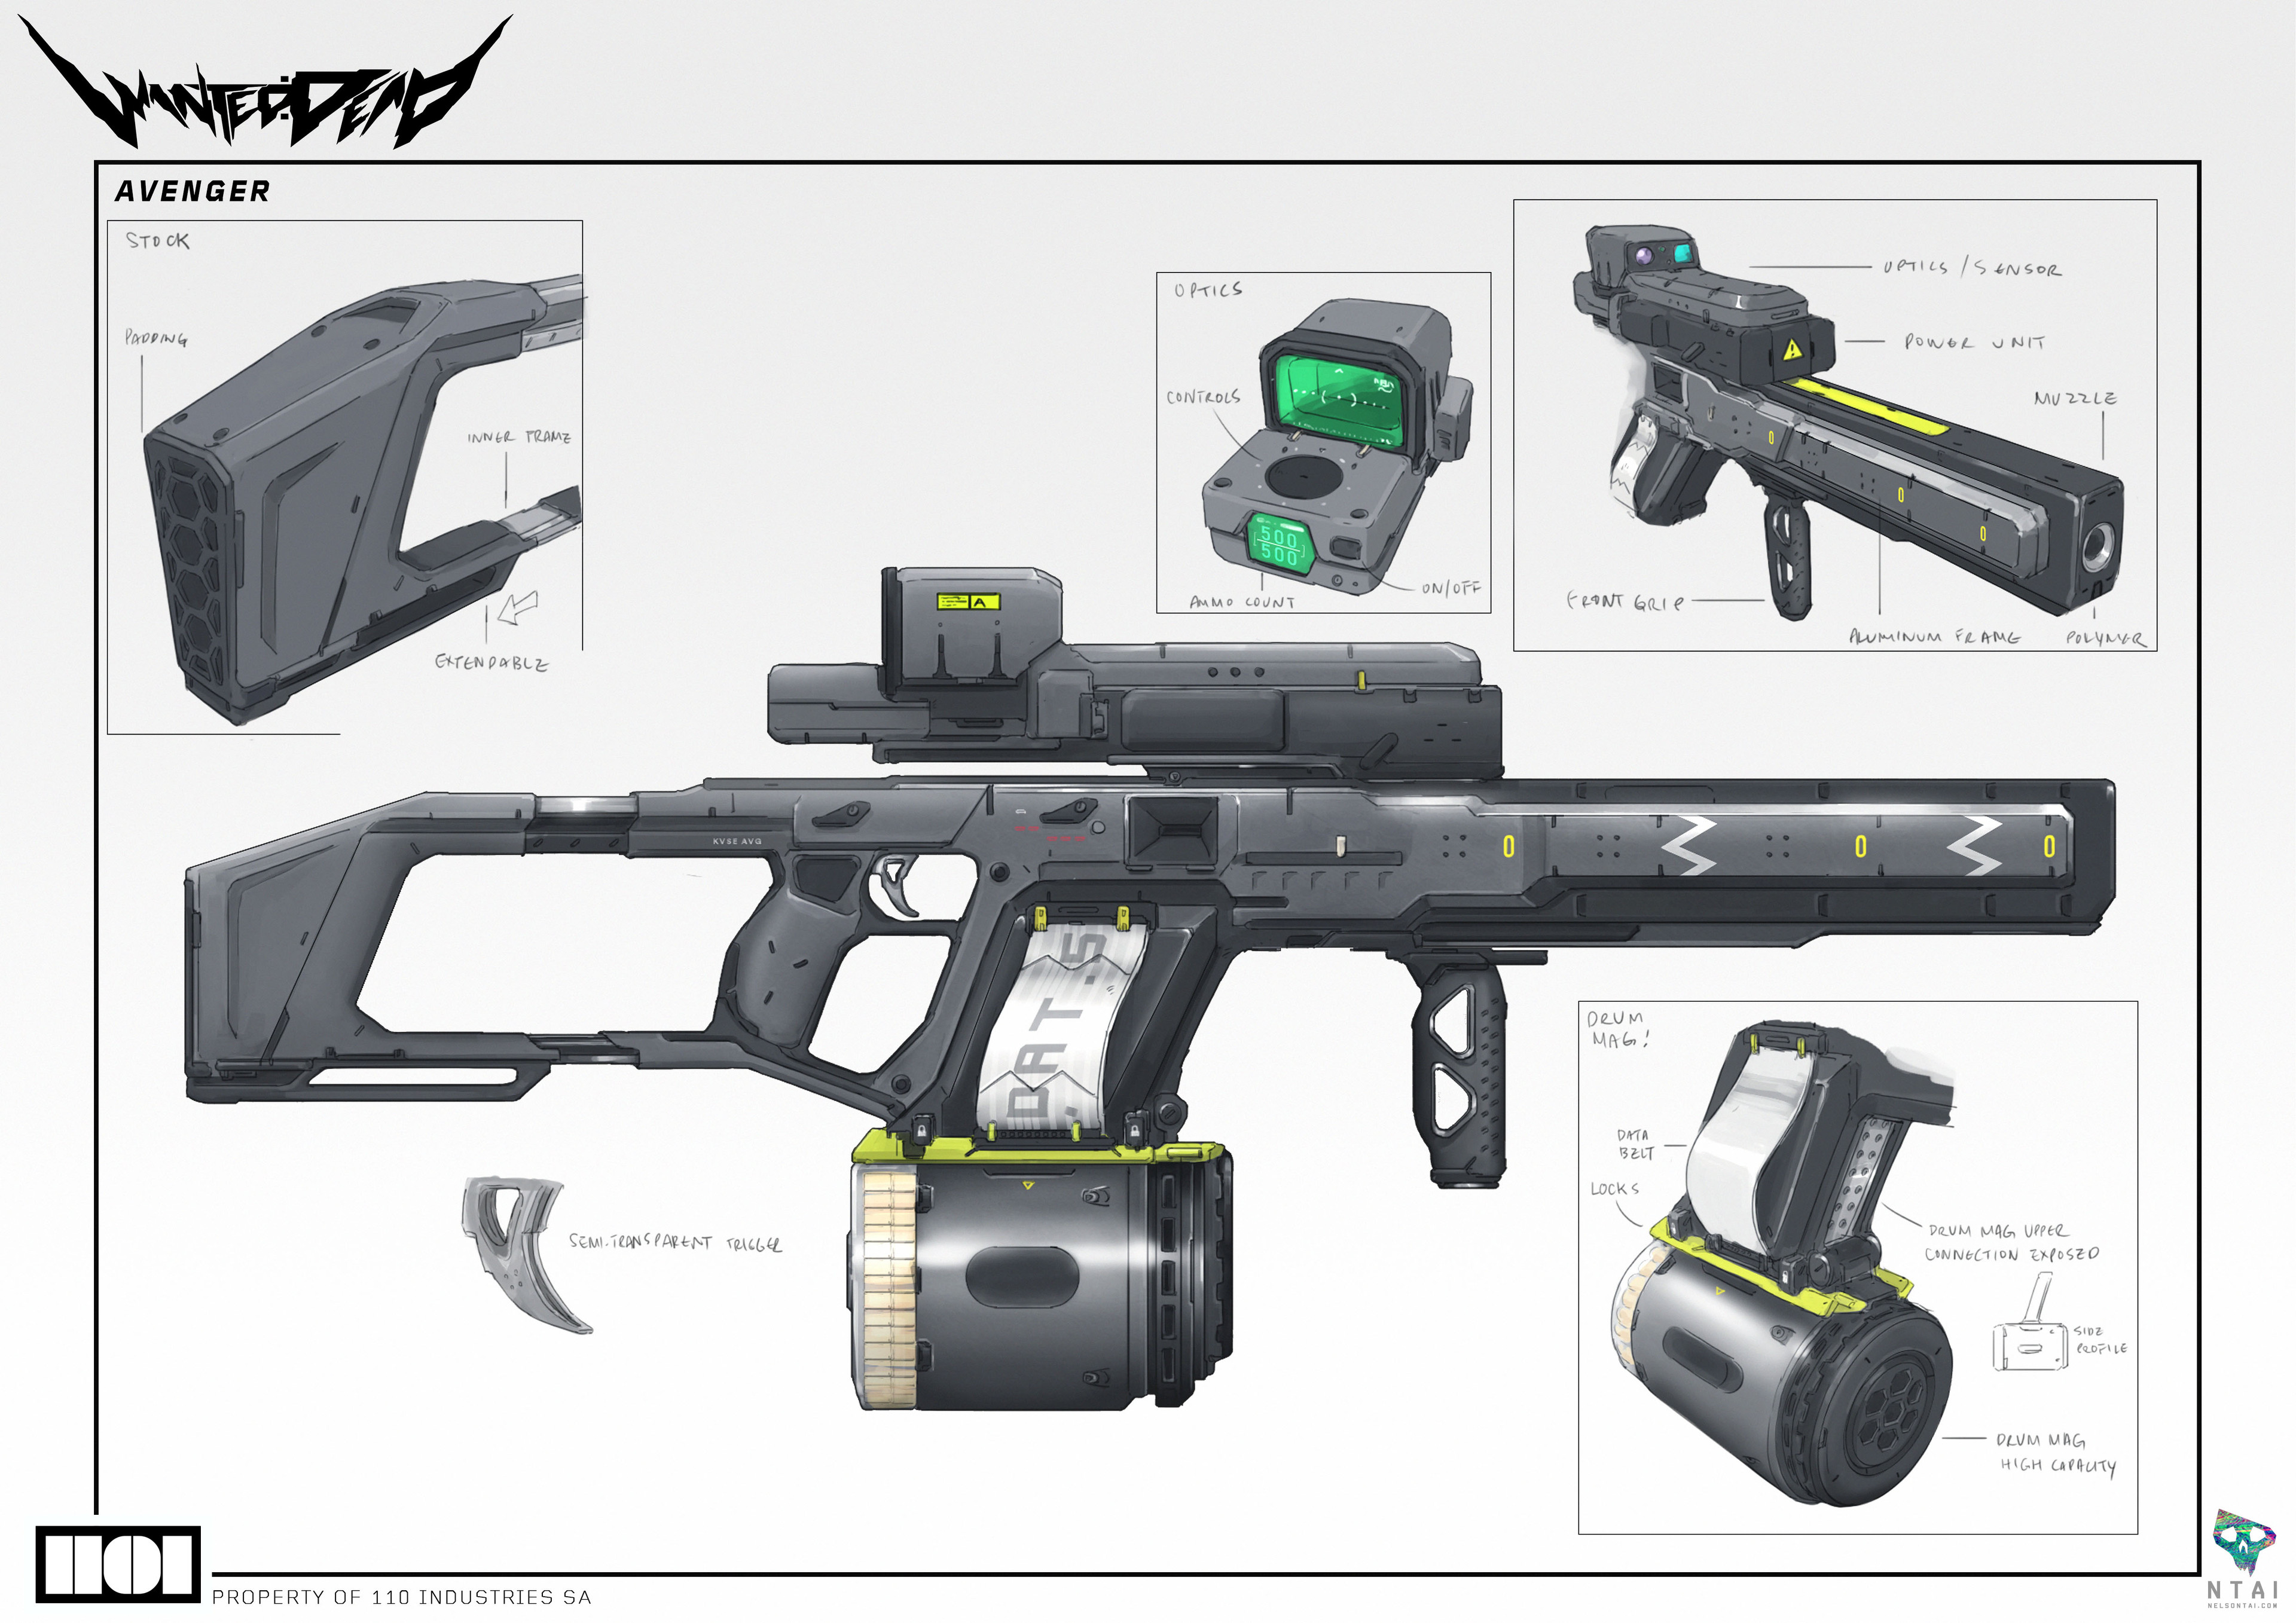 Weapons - Avenger. Futuristic rifle. Based on the Vector